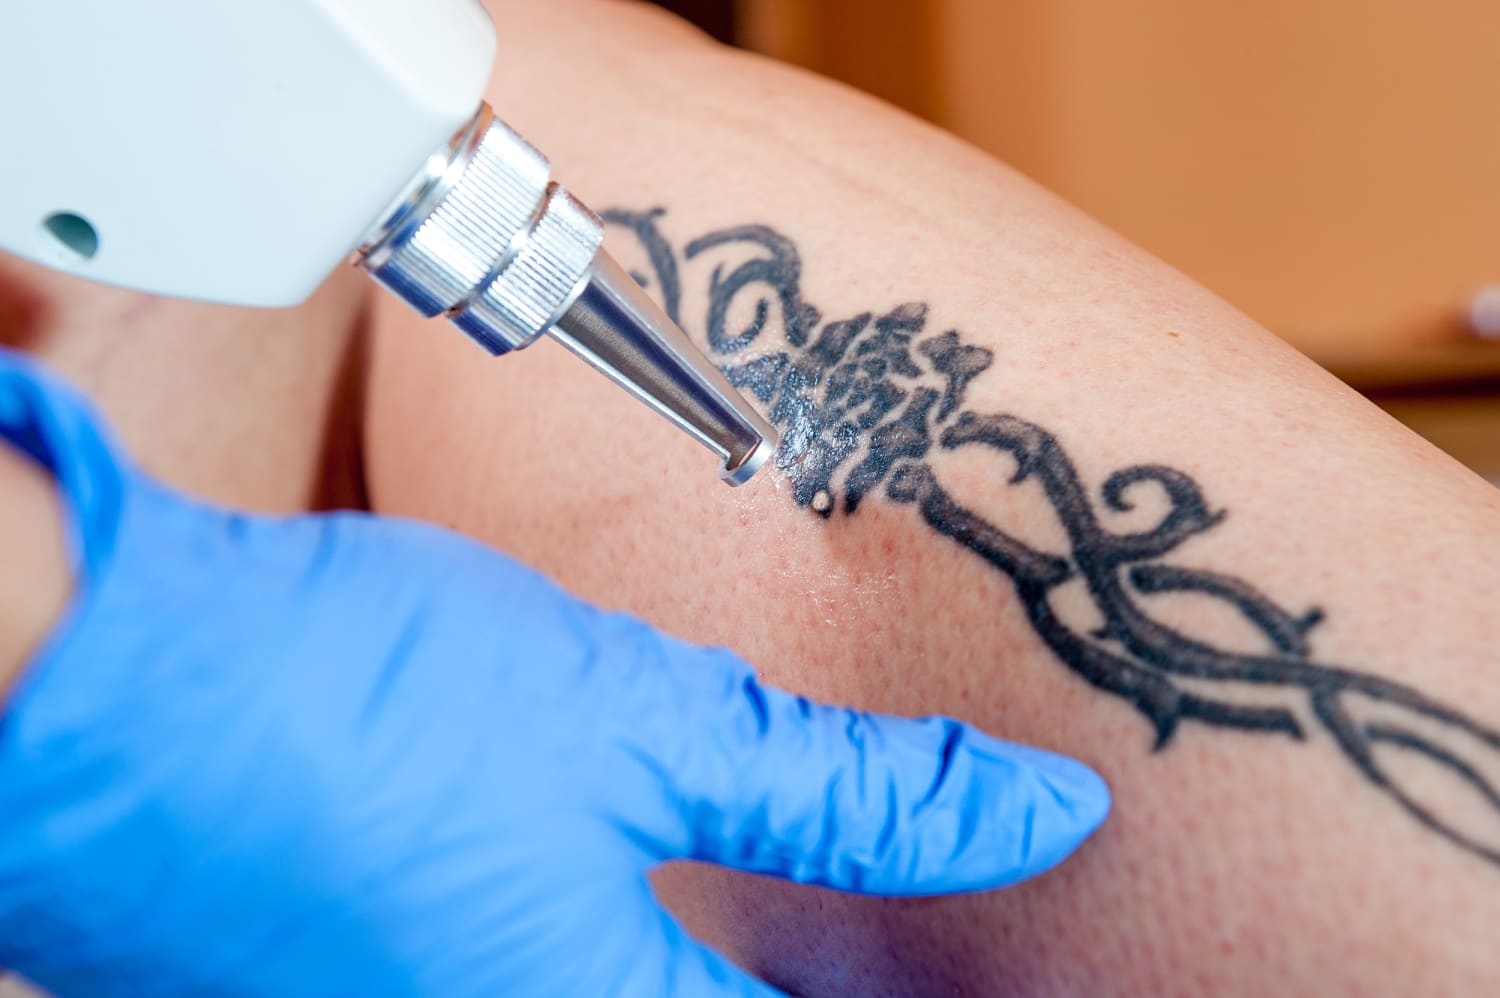 Tattoo Removal Creams A Guide for Beginners  LaserAll